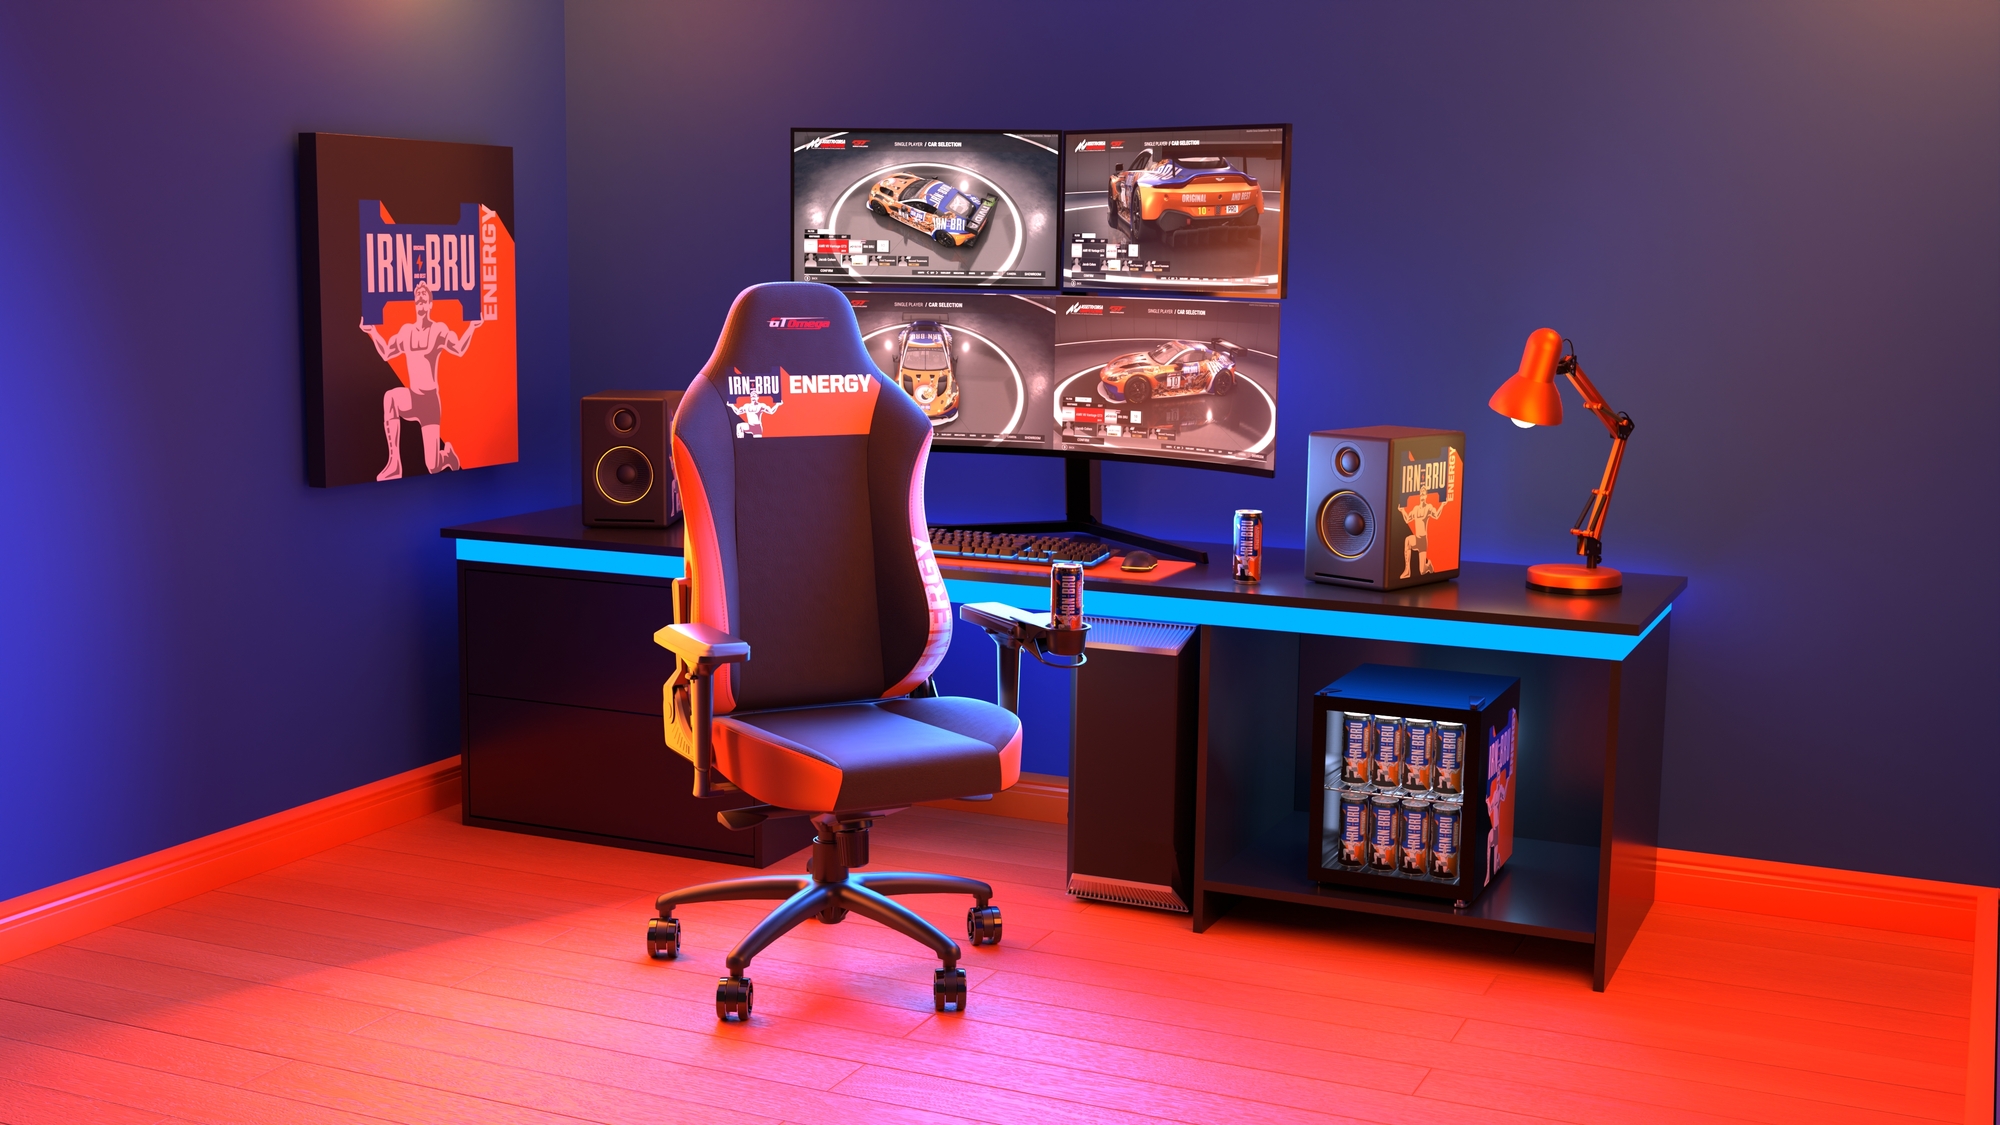 First-ever IRN-BRU energy gaming set up